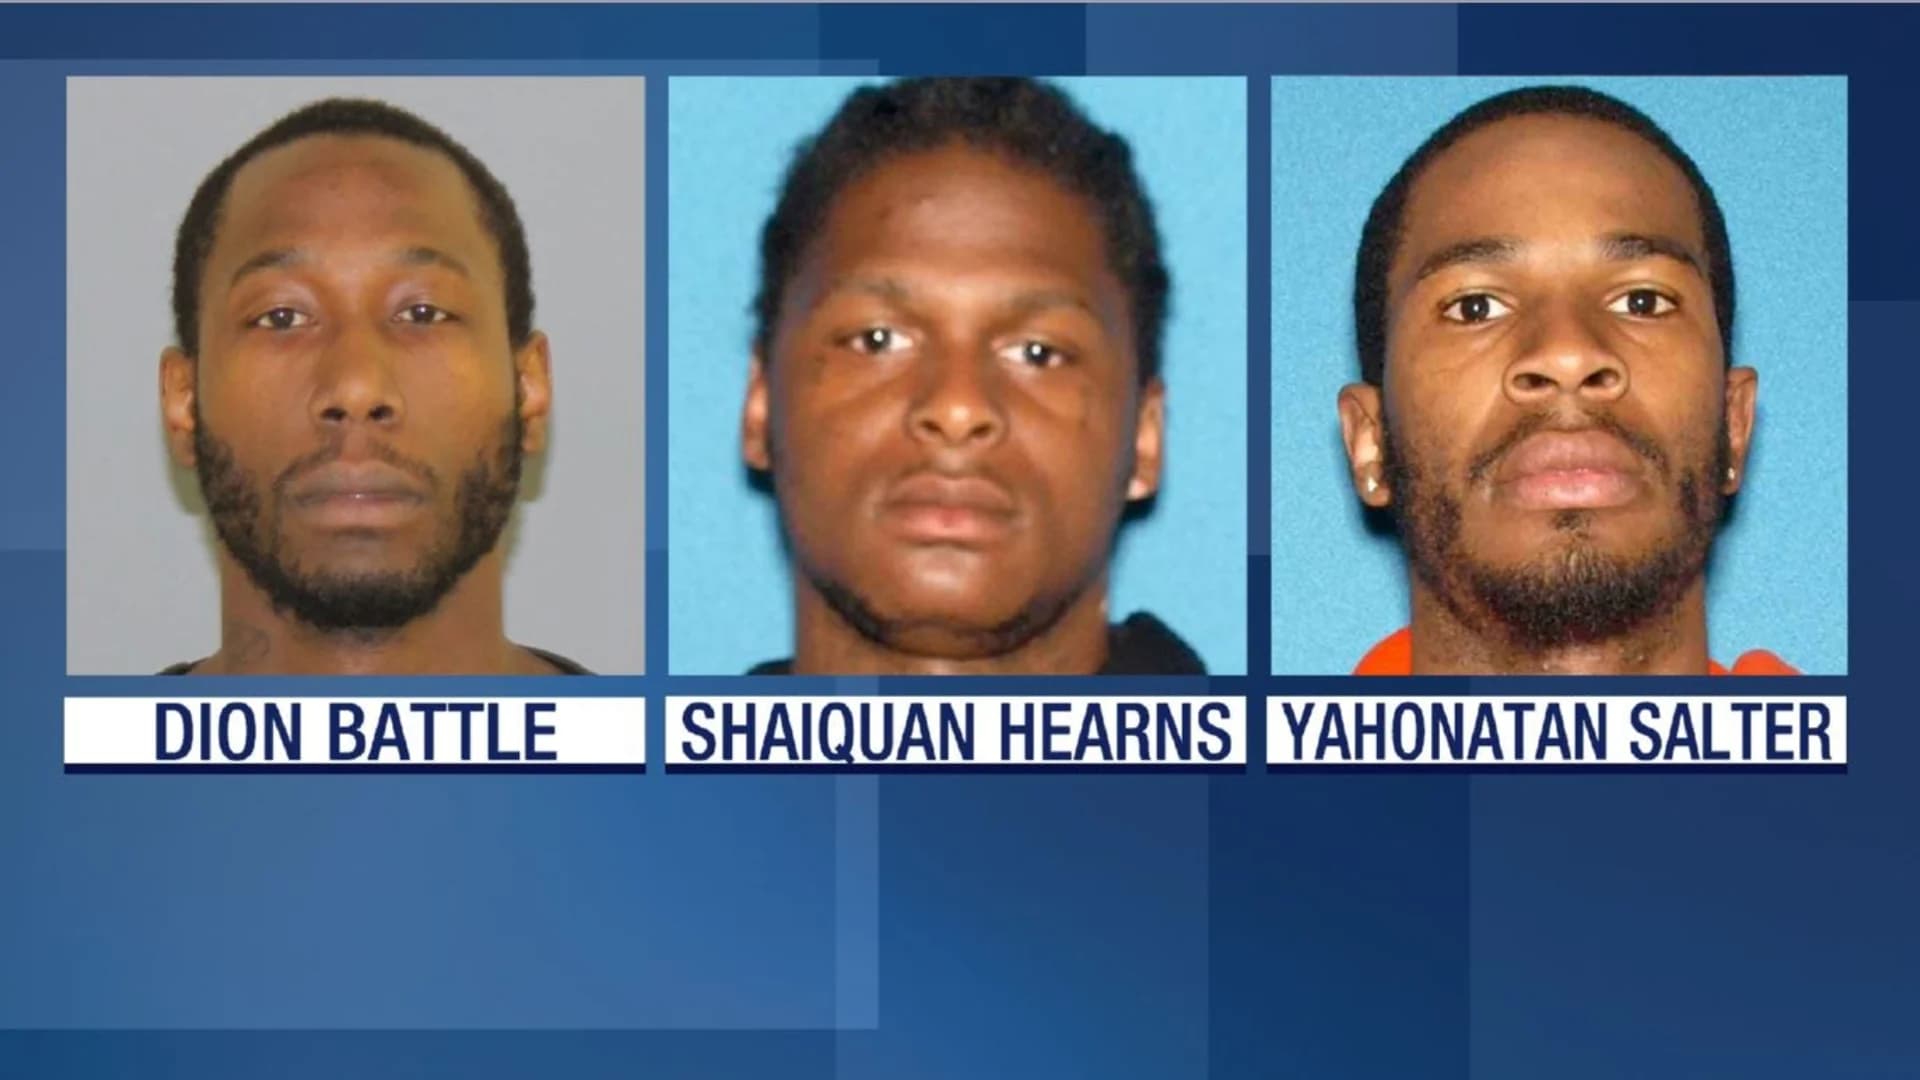 Authorities: 3 men face attempted murder charges for firing at police officers